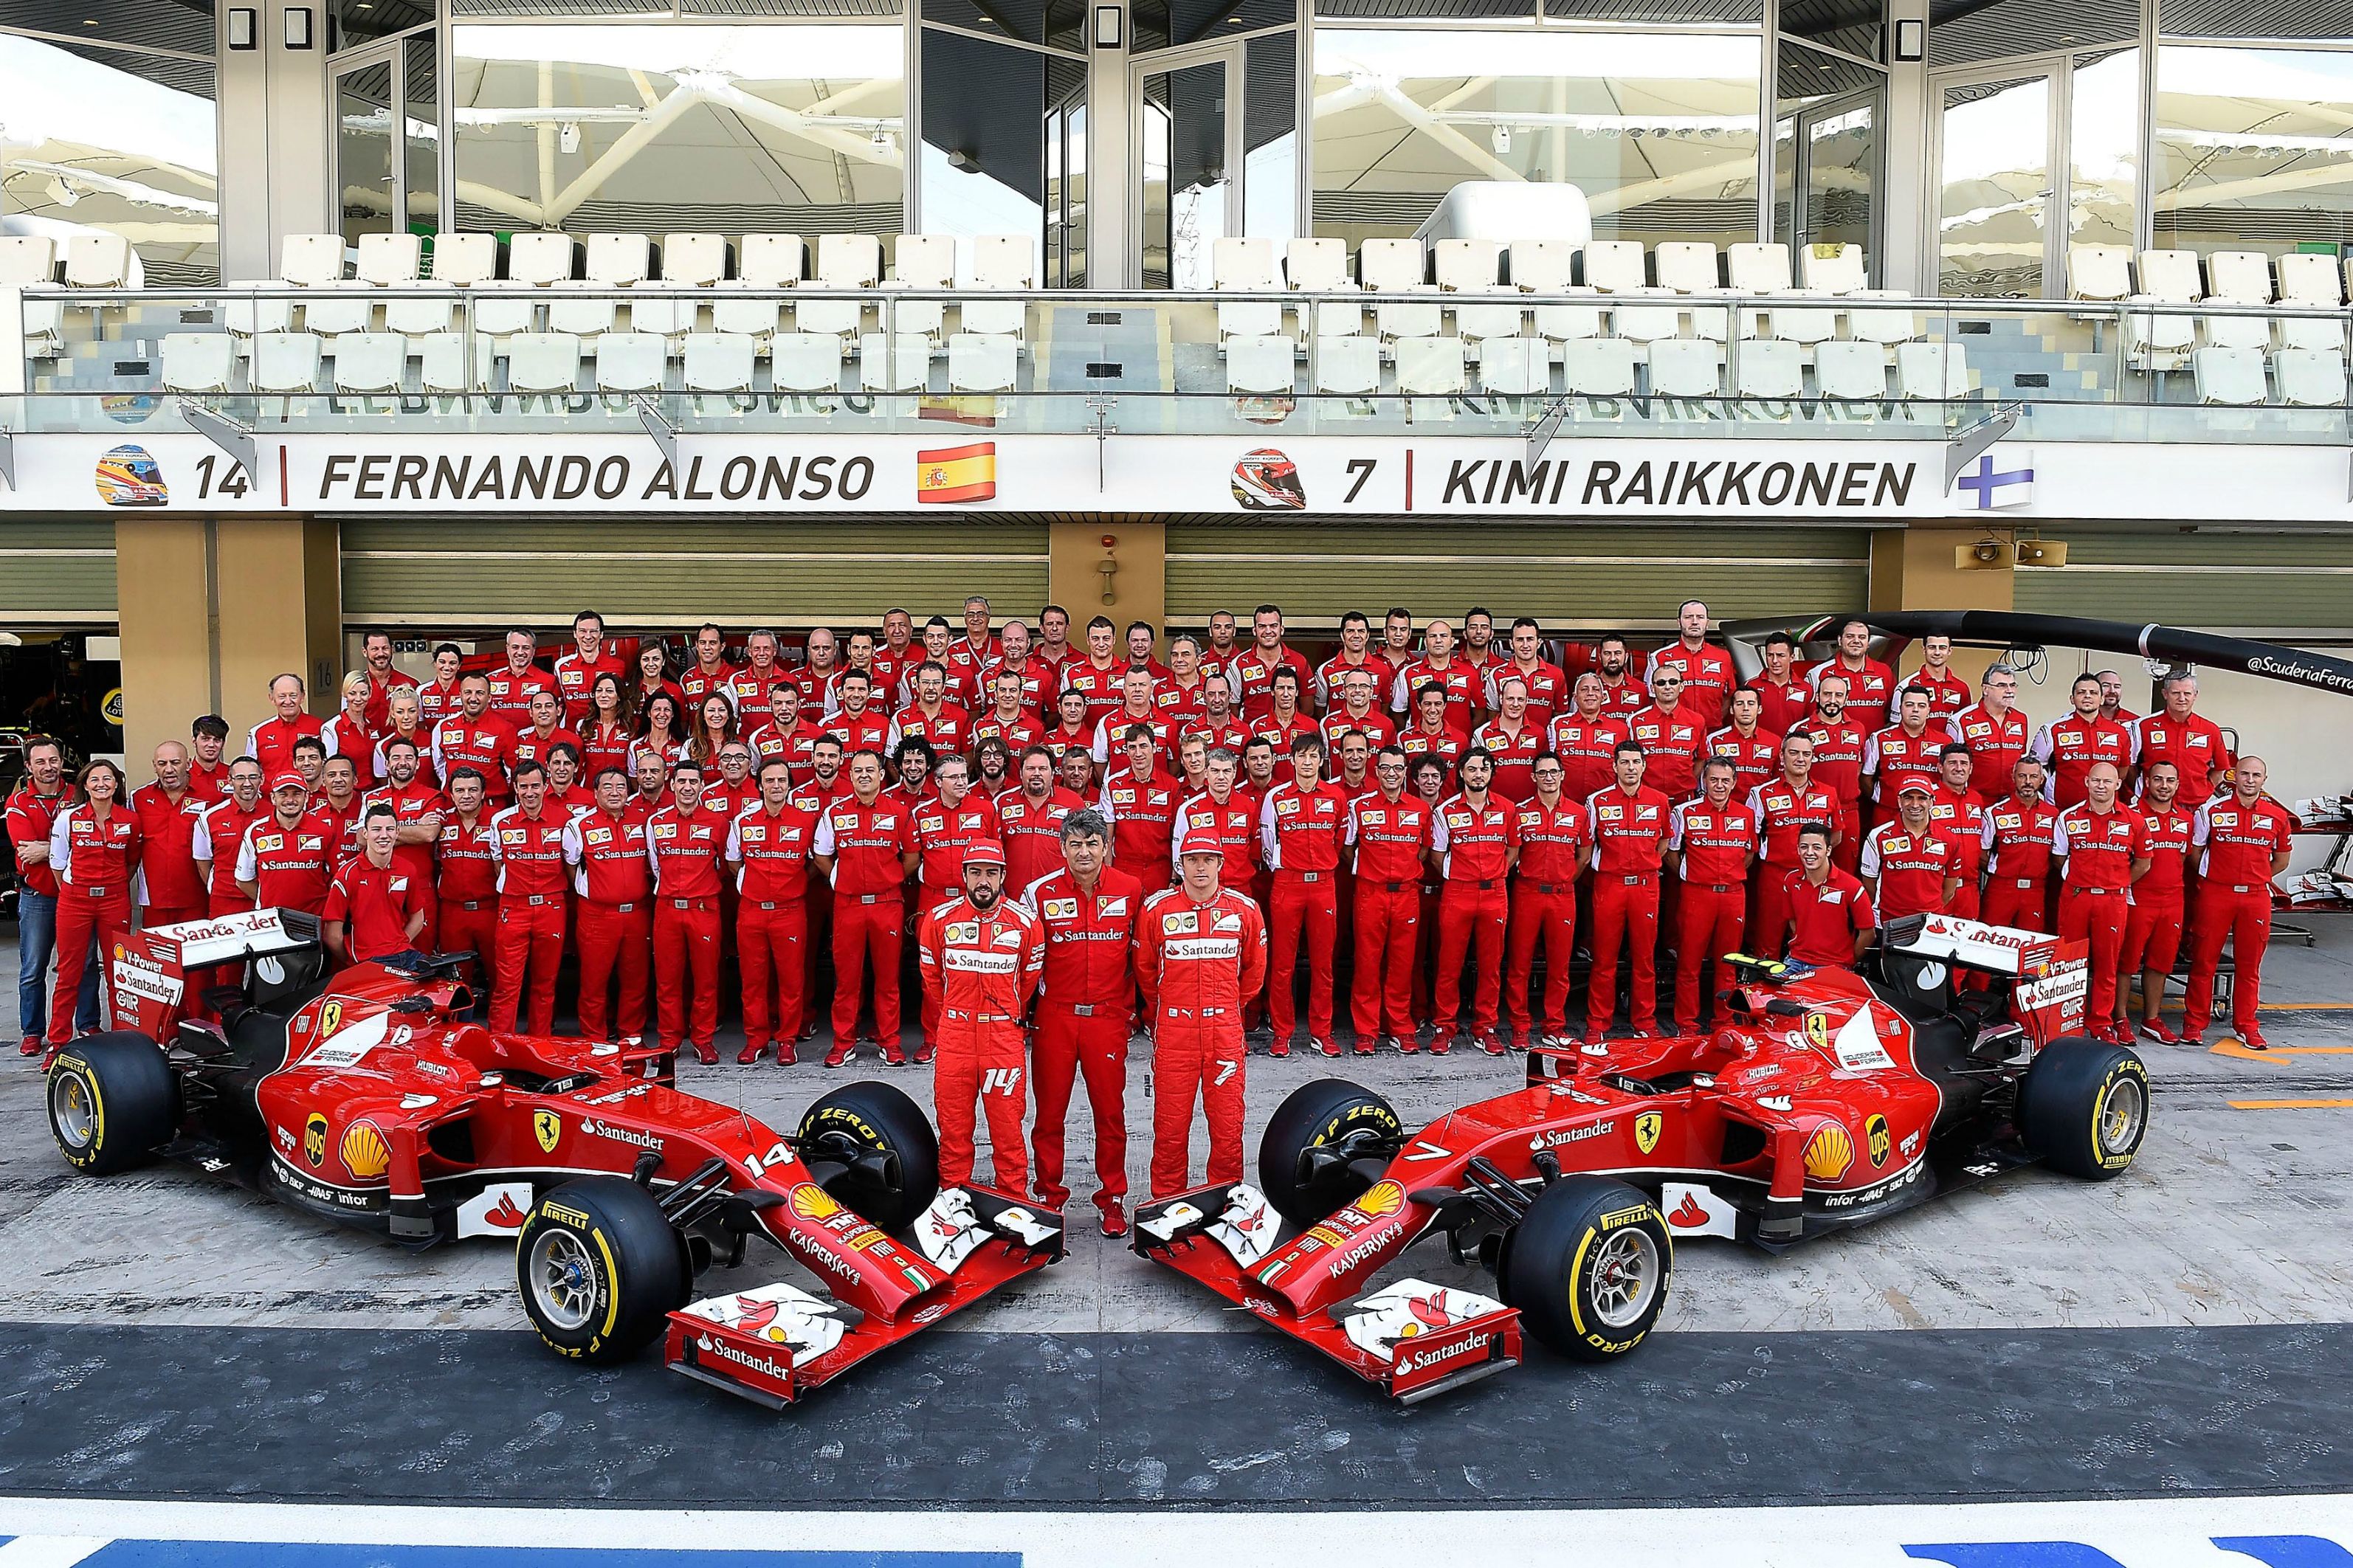 Laughter Spot The Ferrari Formula1 team fired their entire pit crew